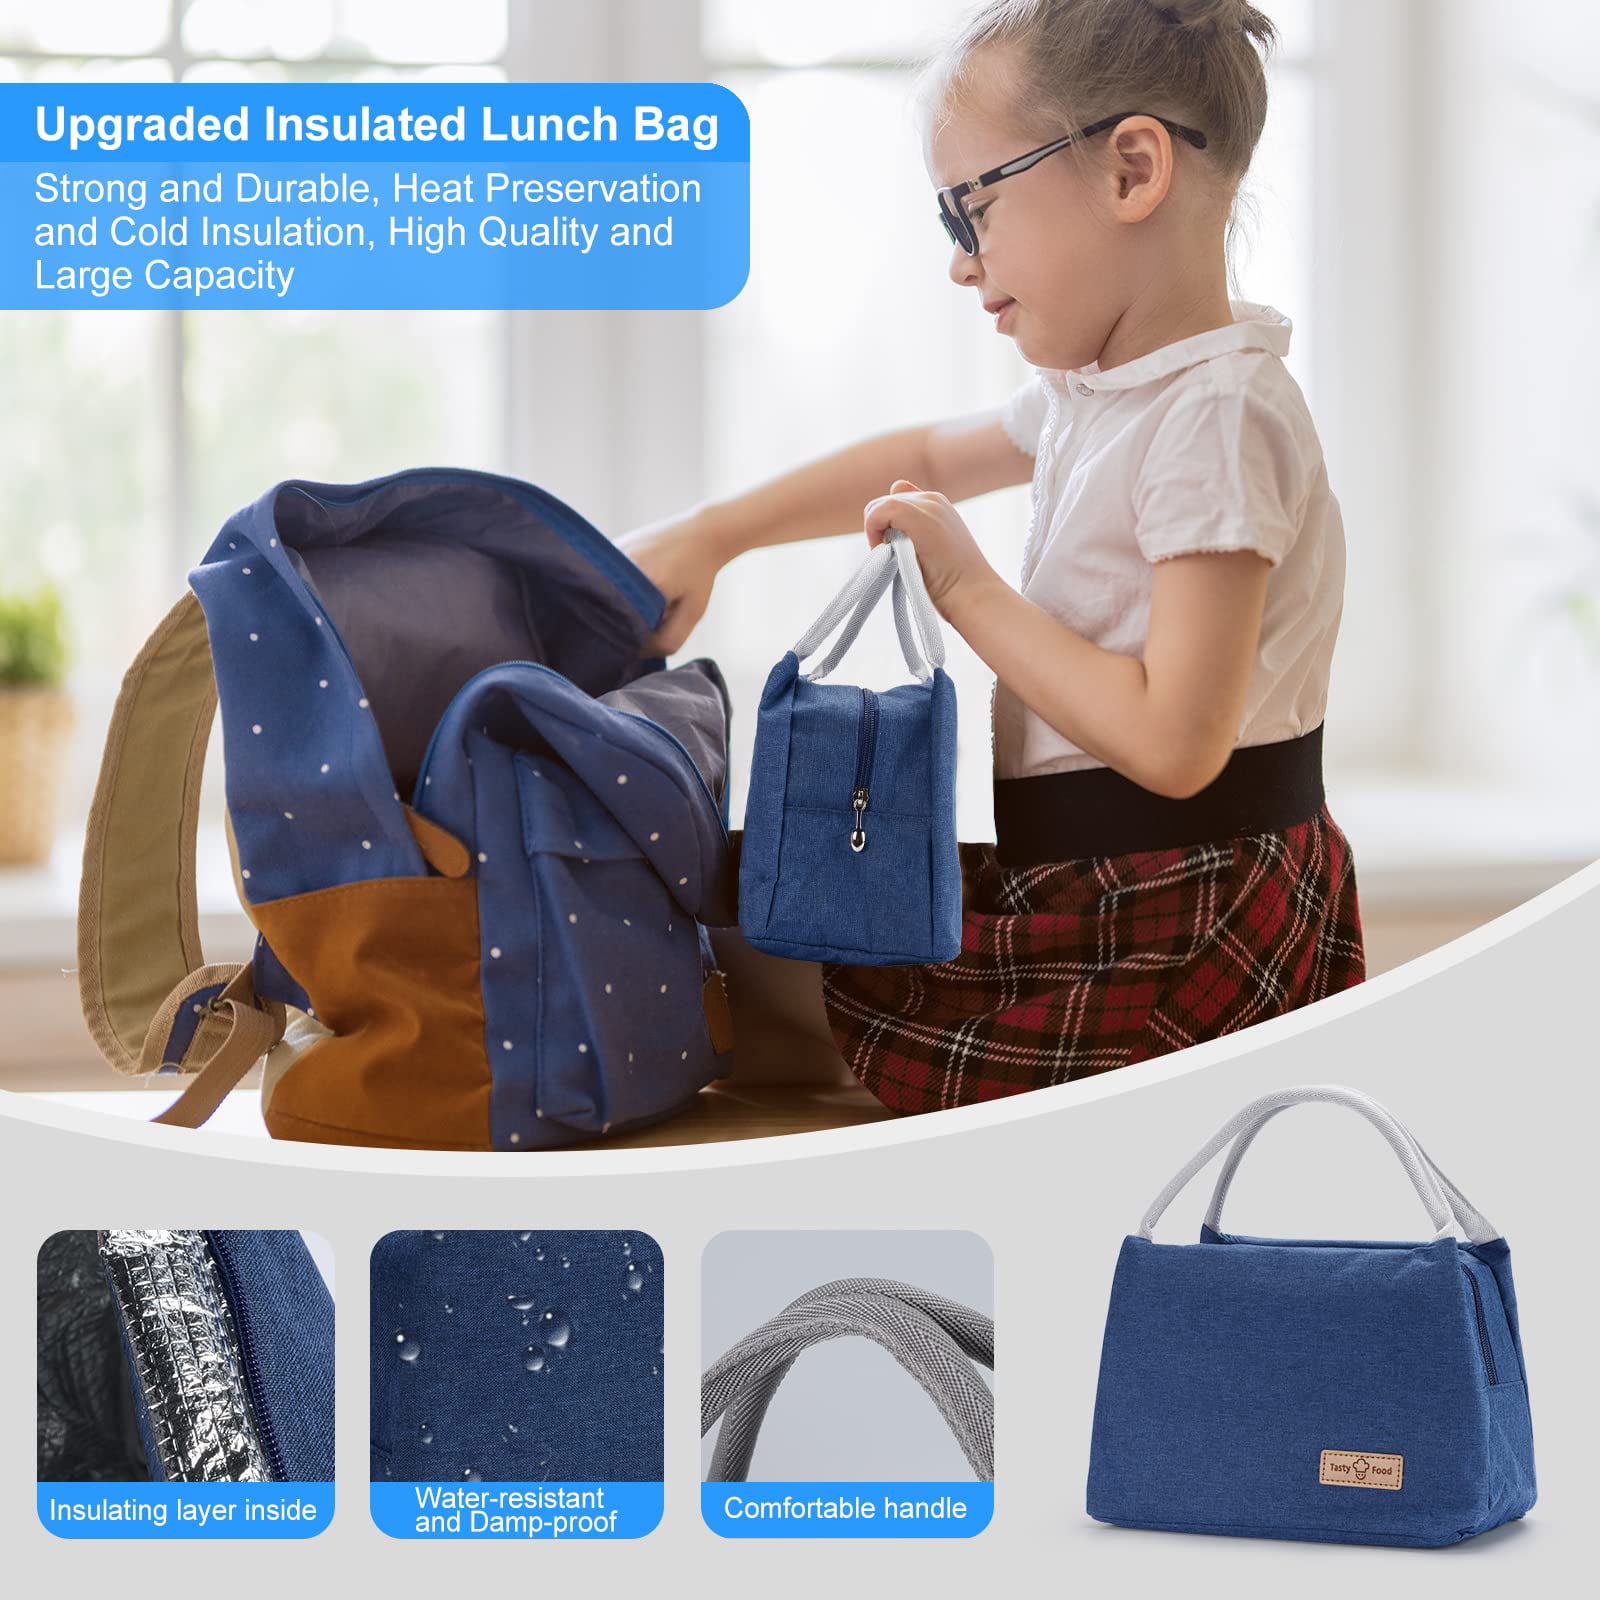 Fimibuke Kids Bento Snack Lunch Box with 4 Compartments, Insulated lunch  Bag, Stainless Steel Thermo…See more Fimibuke Kids Bento Snack Lunch Box  with